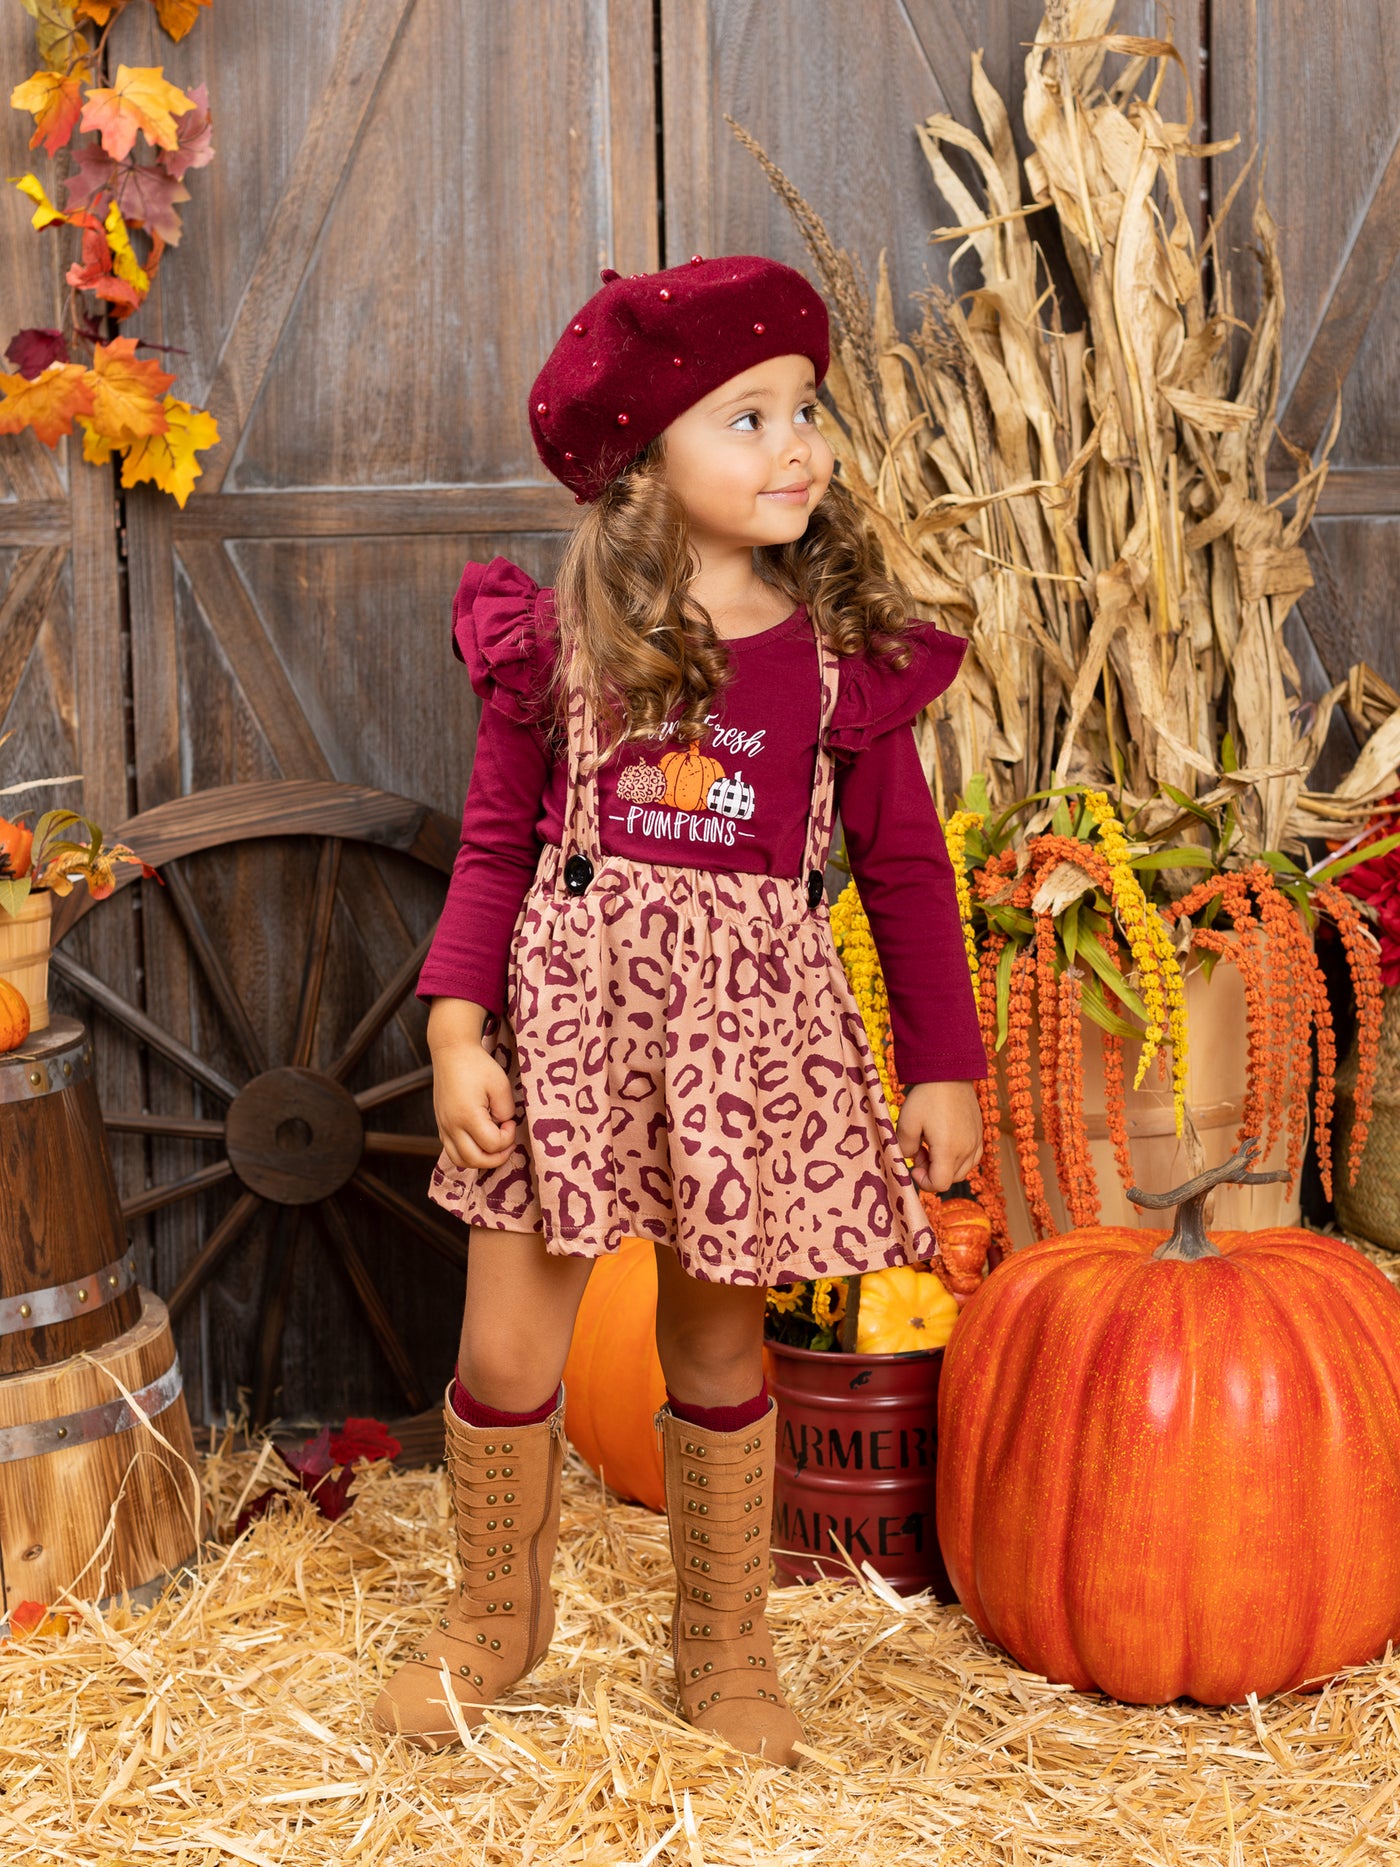 Little girls Fall long-sleeved "Farm Fresh Pumpkins" graphic top with ruffle shoulder accents and leopard print pinafore skirt - Mia Belle Girls